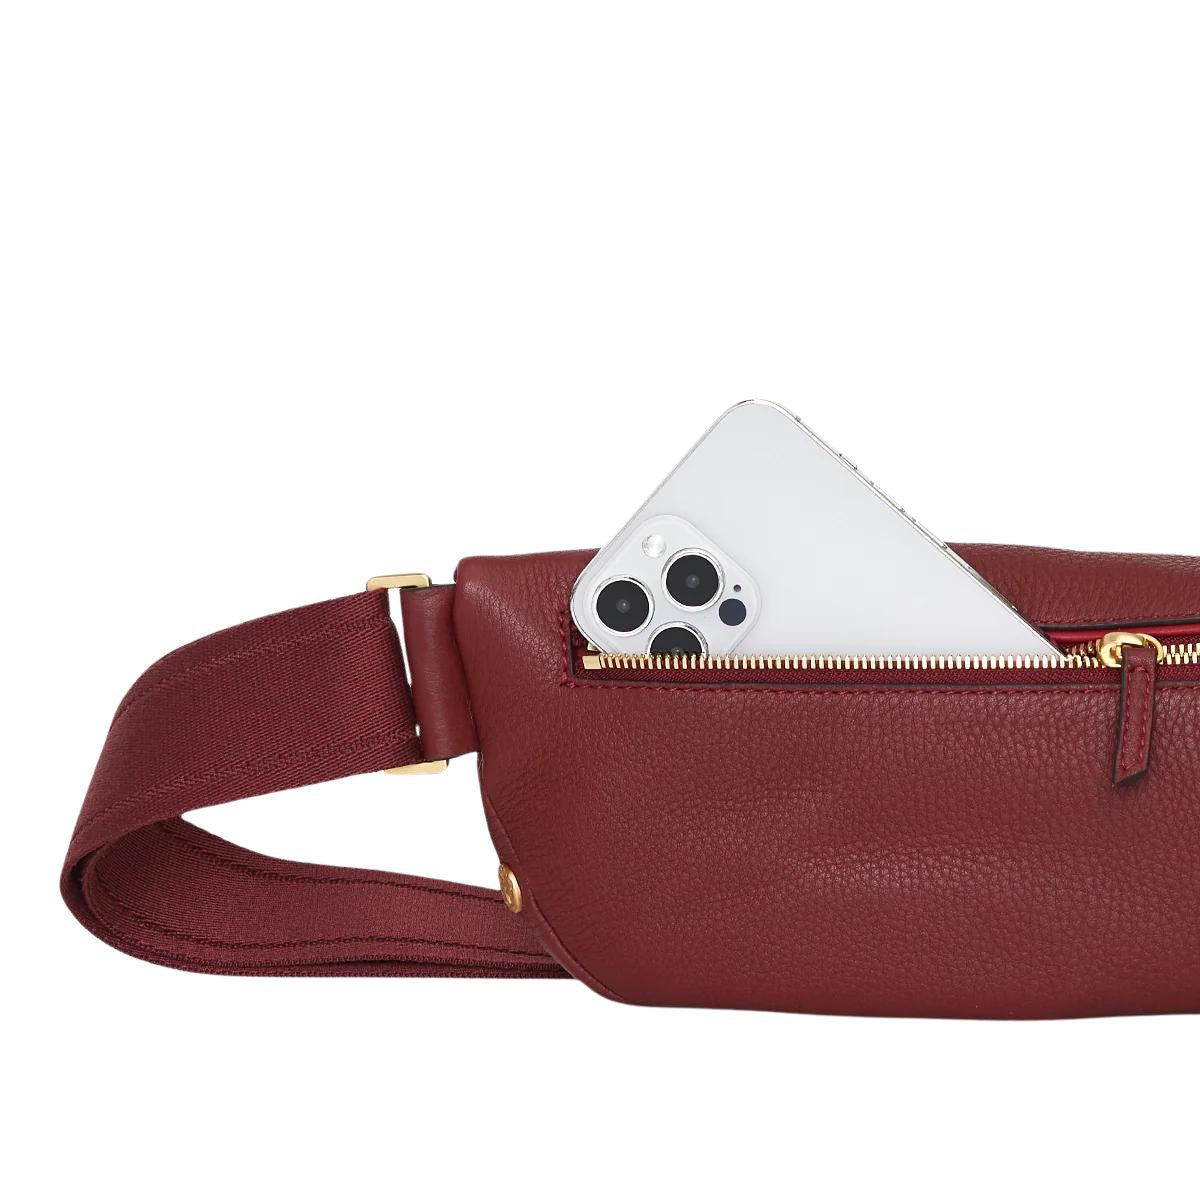 Hammitt Charles Crossbody in Pomodoro Red with Hammered Brushed Gold